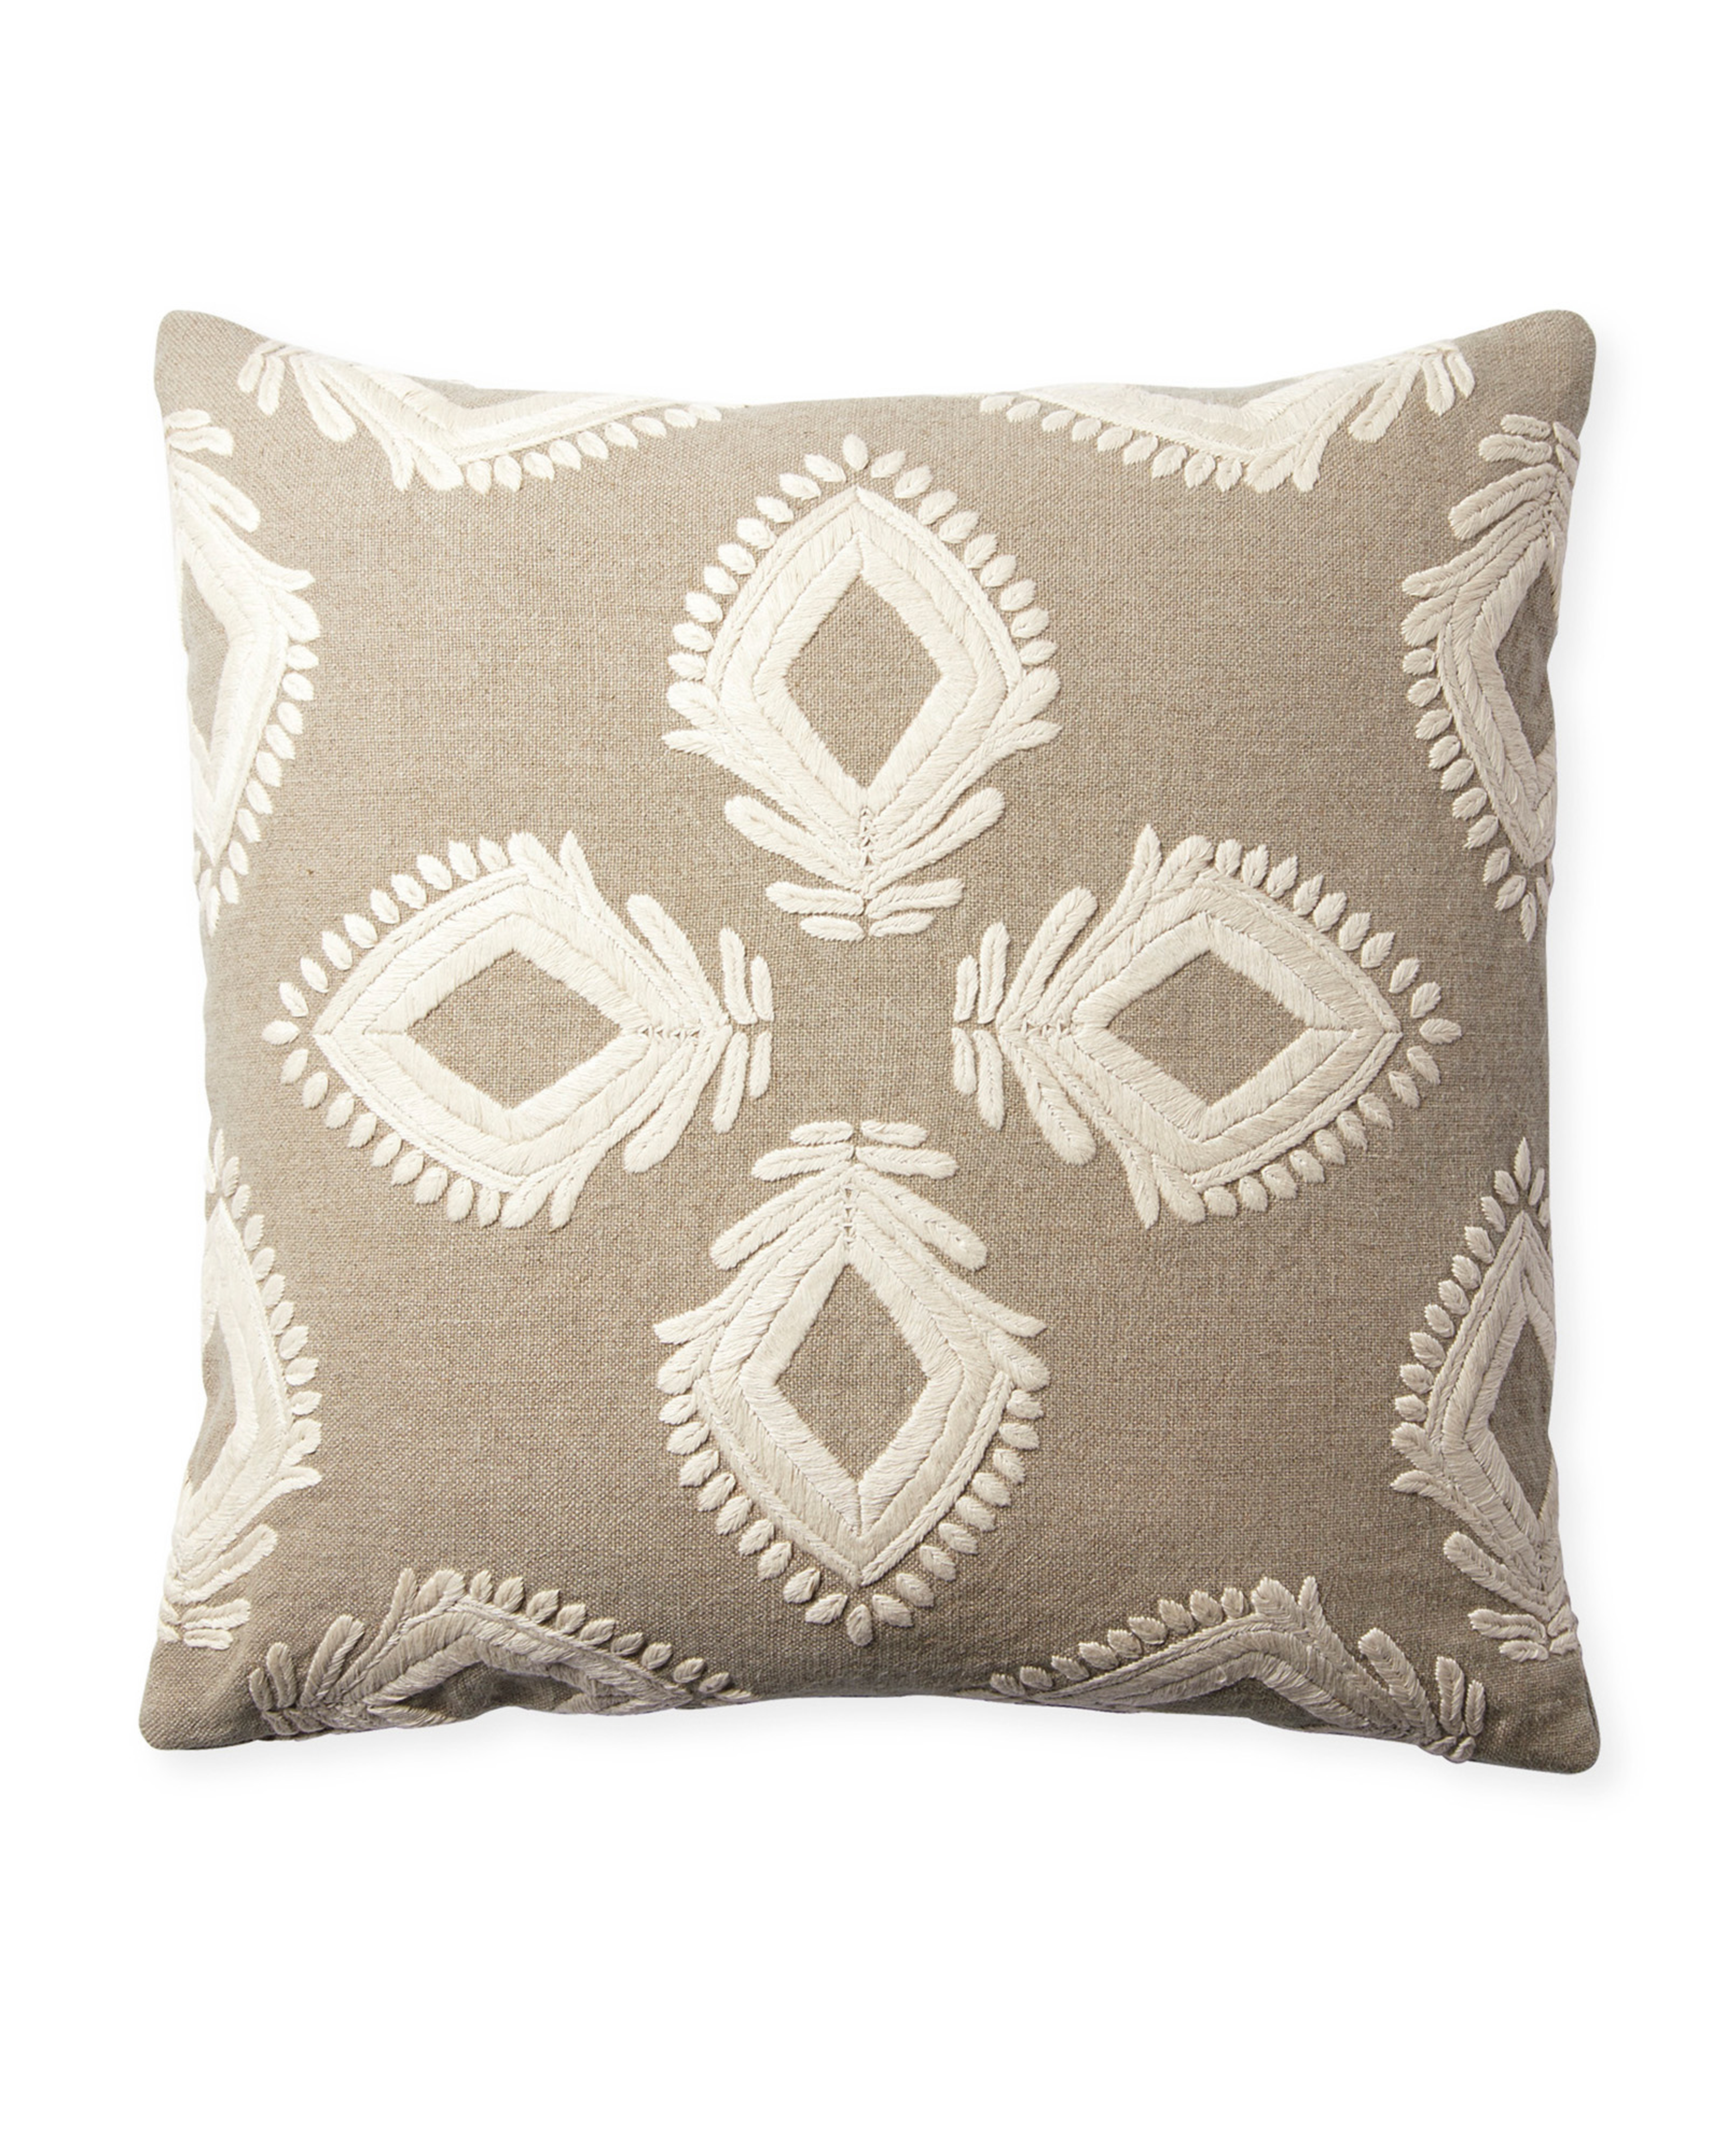 Leighton 24" SQ Pillow Cover - Flax - Insert sold separately - Serena and Lily